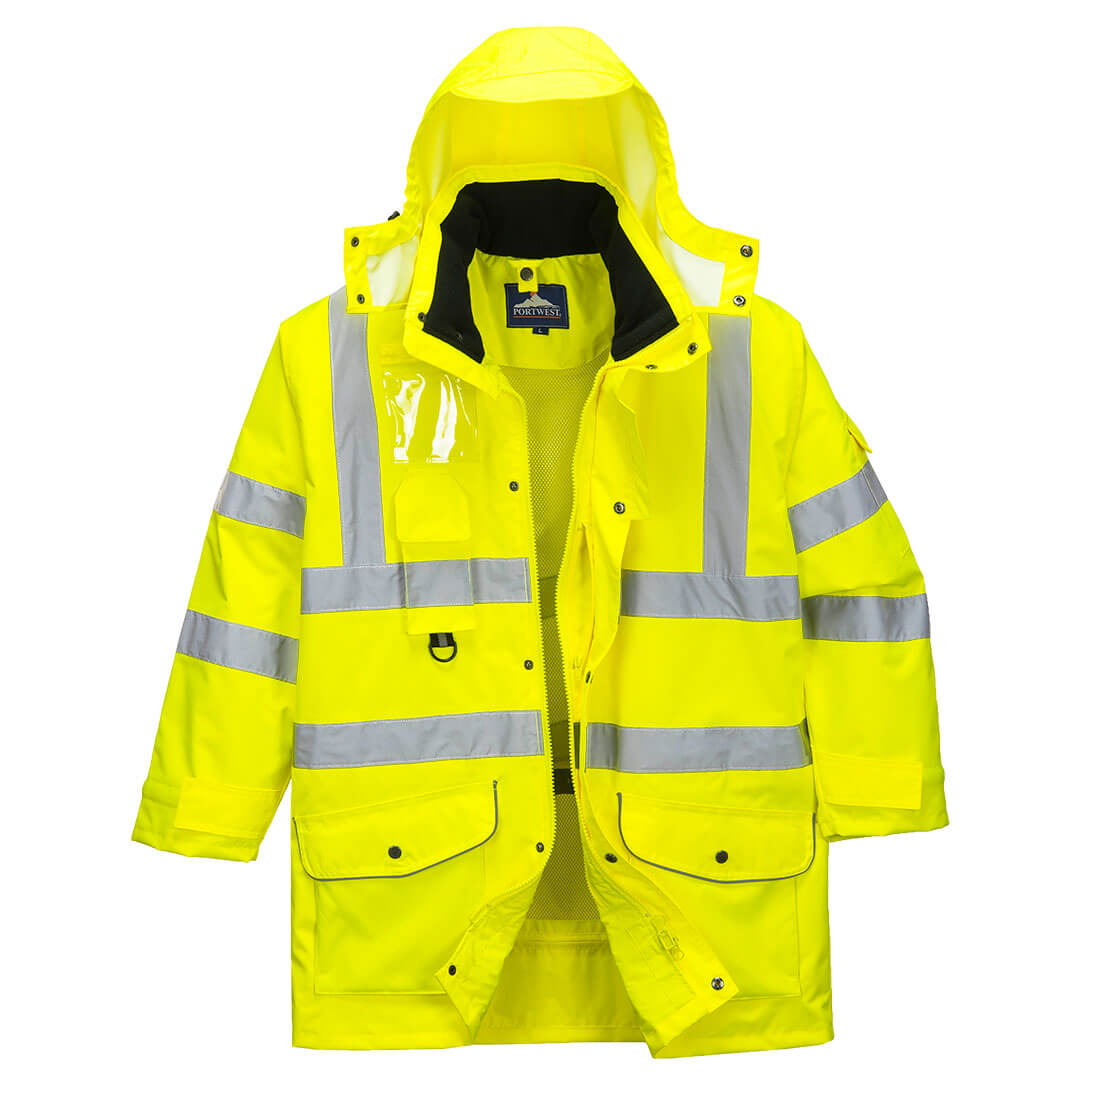 Image of Oxford Weave 300D Class 3 Hi Vis 7-in-1 Traffic Jacket Yellow 3XL